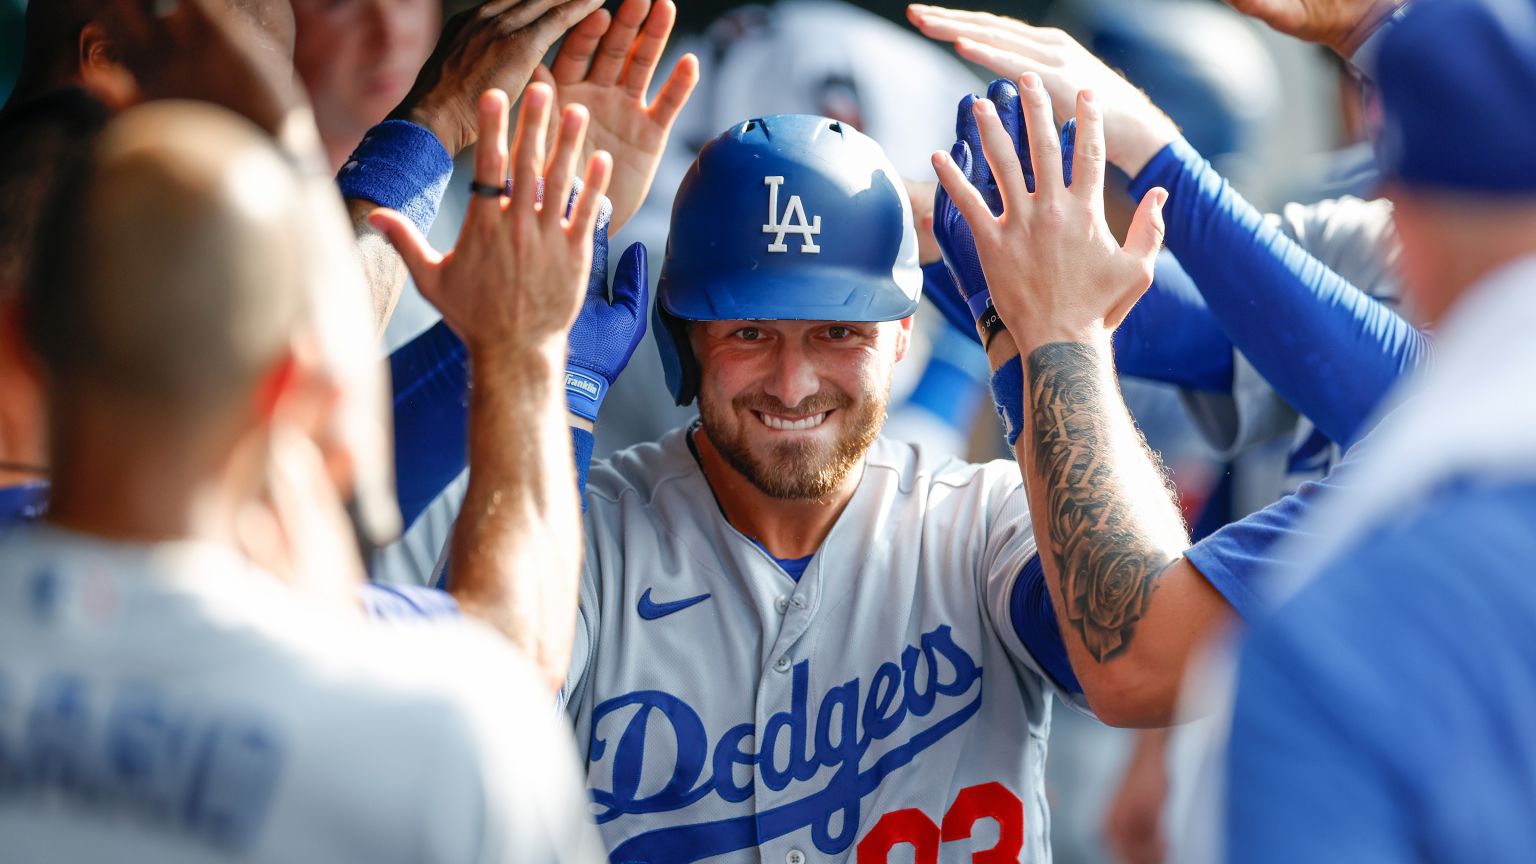 Los Angeles Dodgers on X: Playing catch with Dad on your birthday